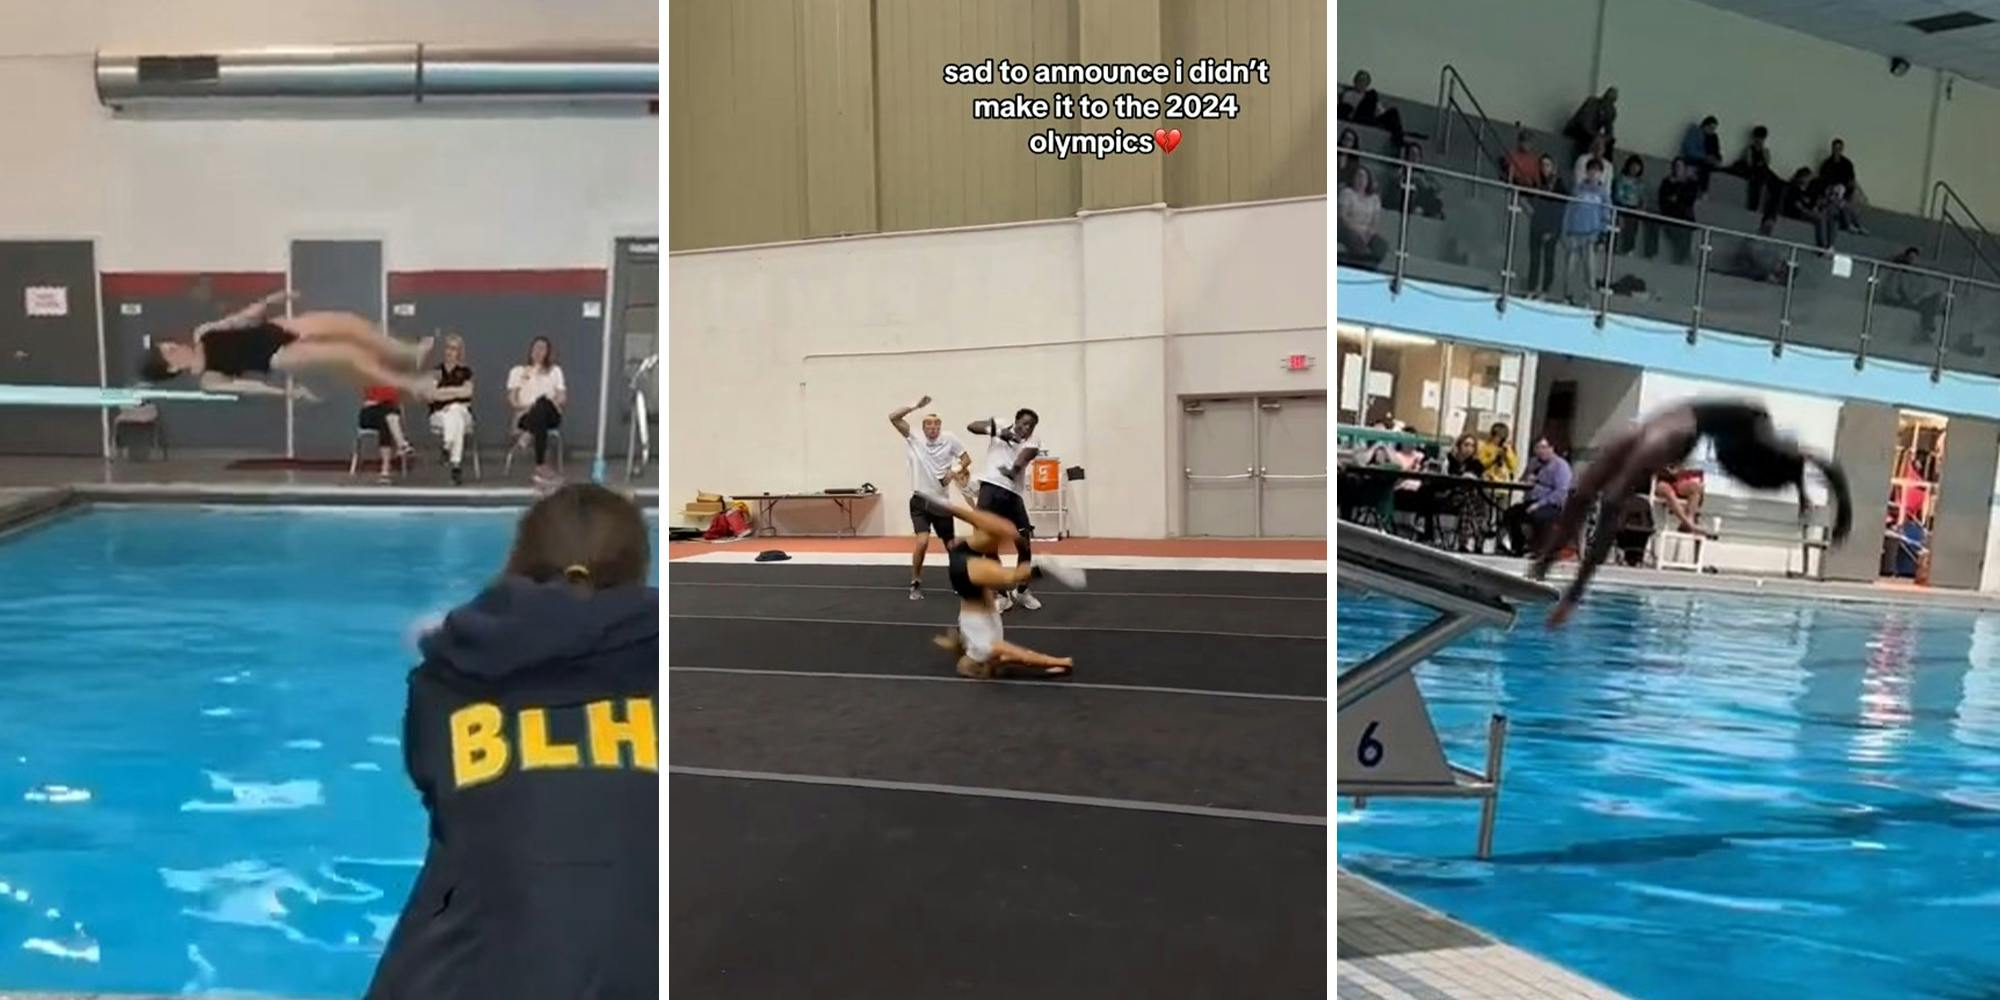 Athletes are sharing videos of why they won't be attending the Olympics